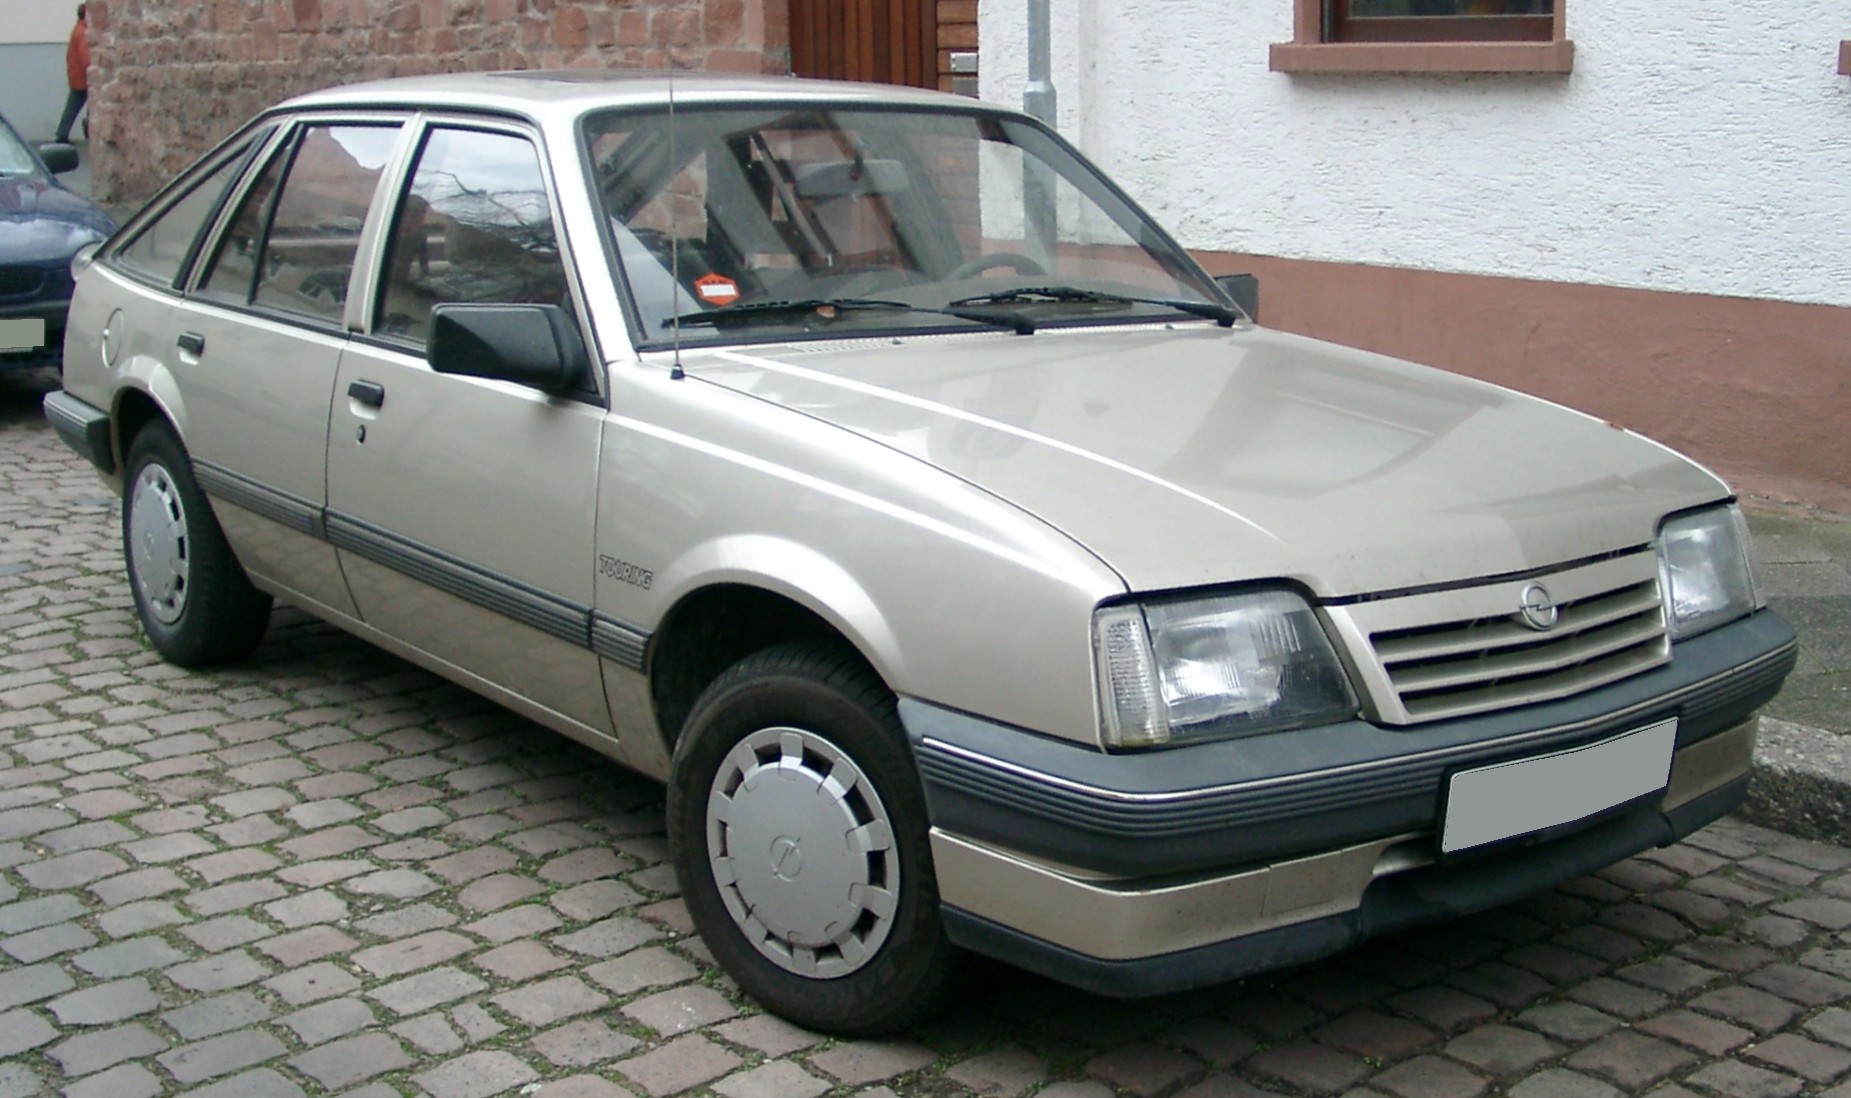 http://fr.academic.ru/pictures/frwiki/79/Opel_Ascona_front_20080121.jpg